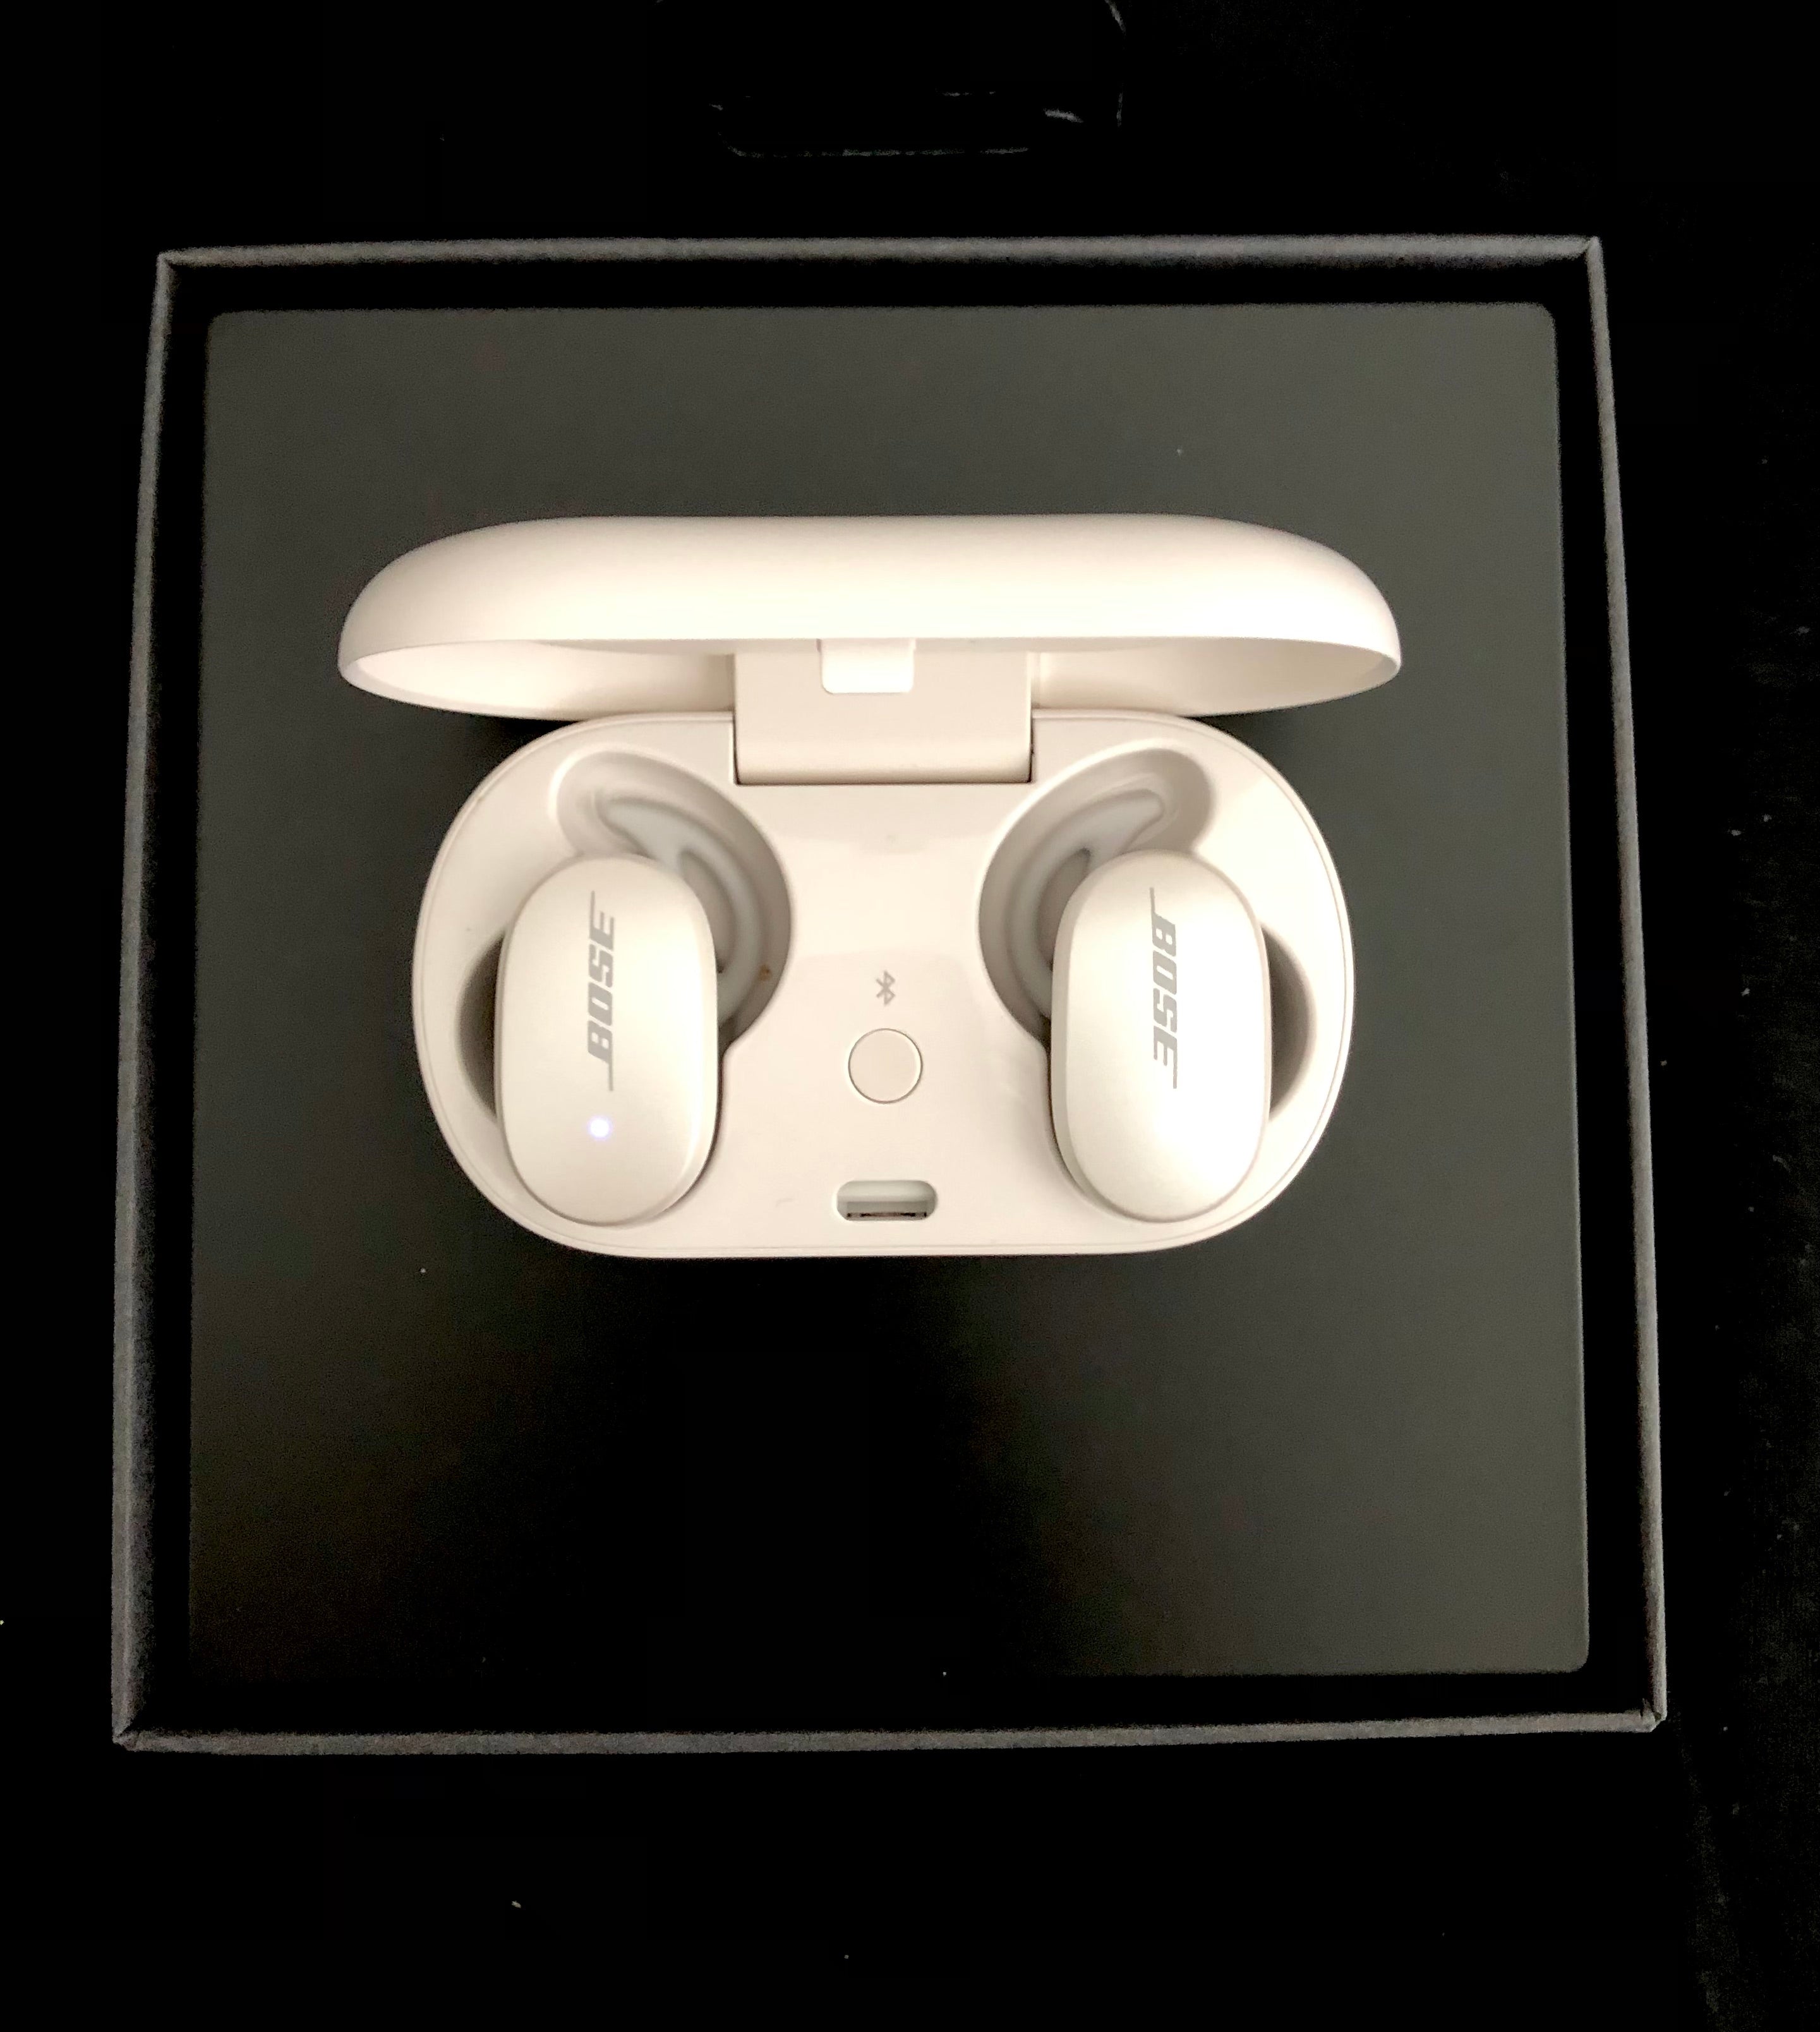 Bose QuietComfort Noise Cancelling Earbuds - white